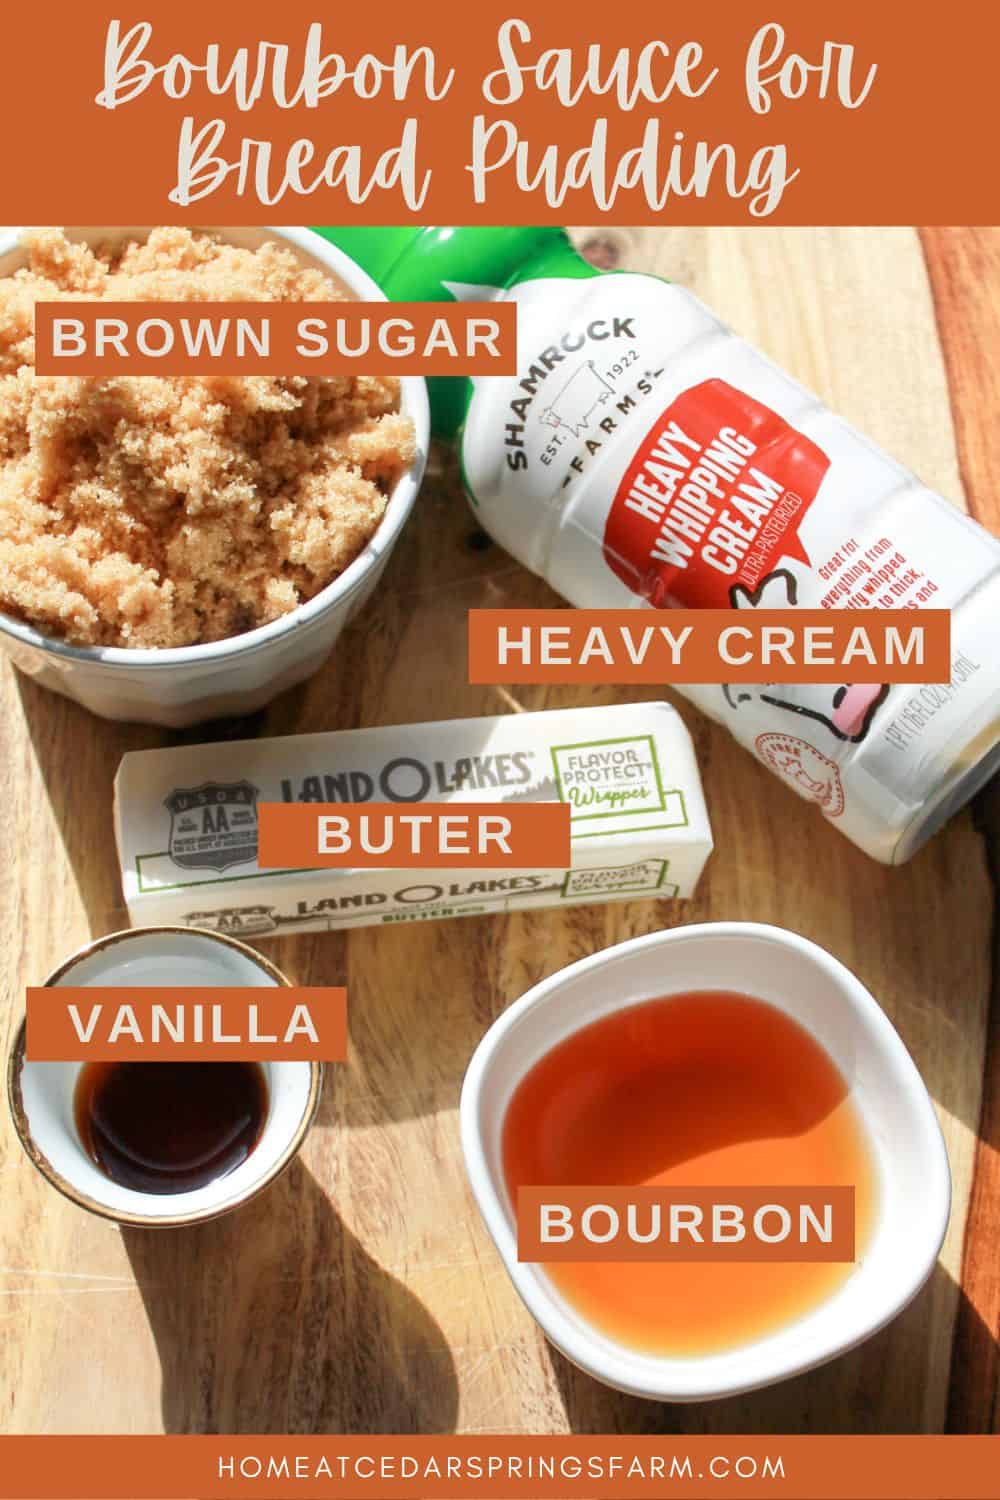 Ingredients needed to make bourbon sauce for the bread pudding with text overlay.